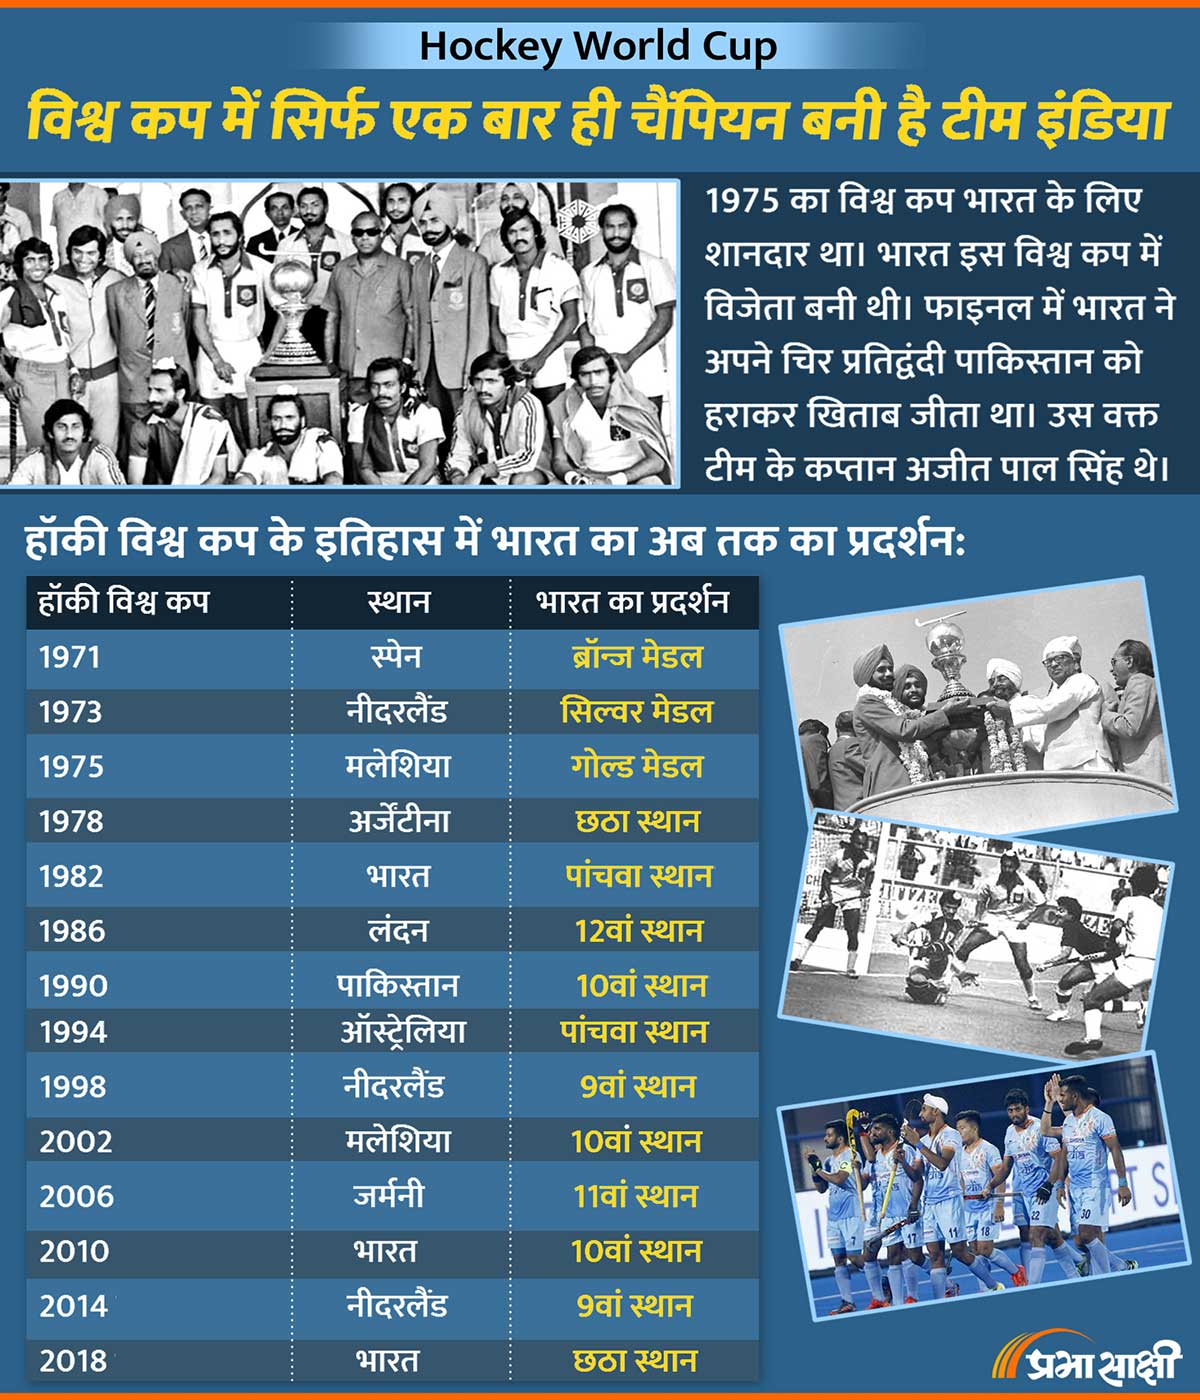 India won Hockey worldcup in 1975